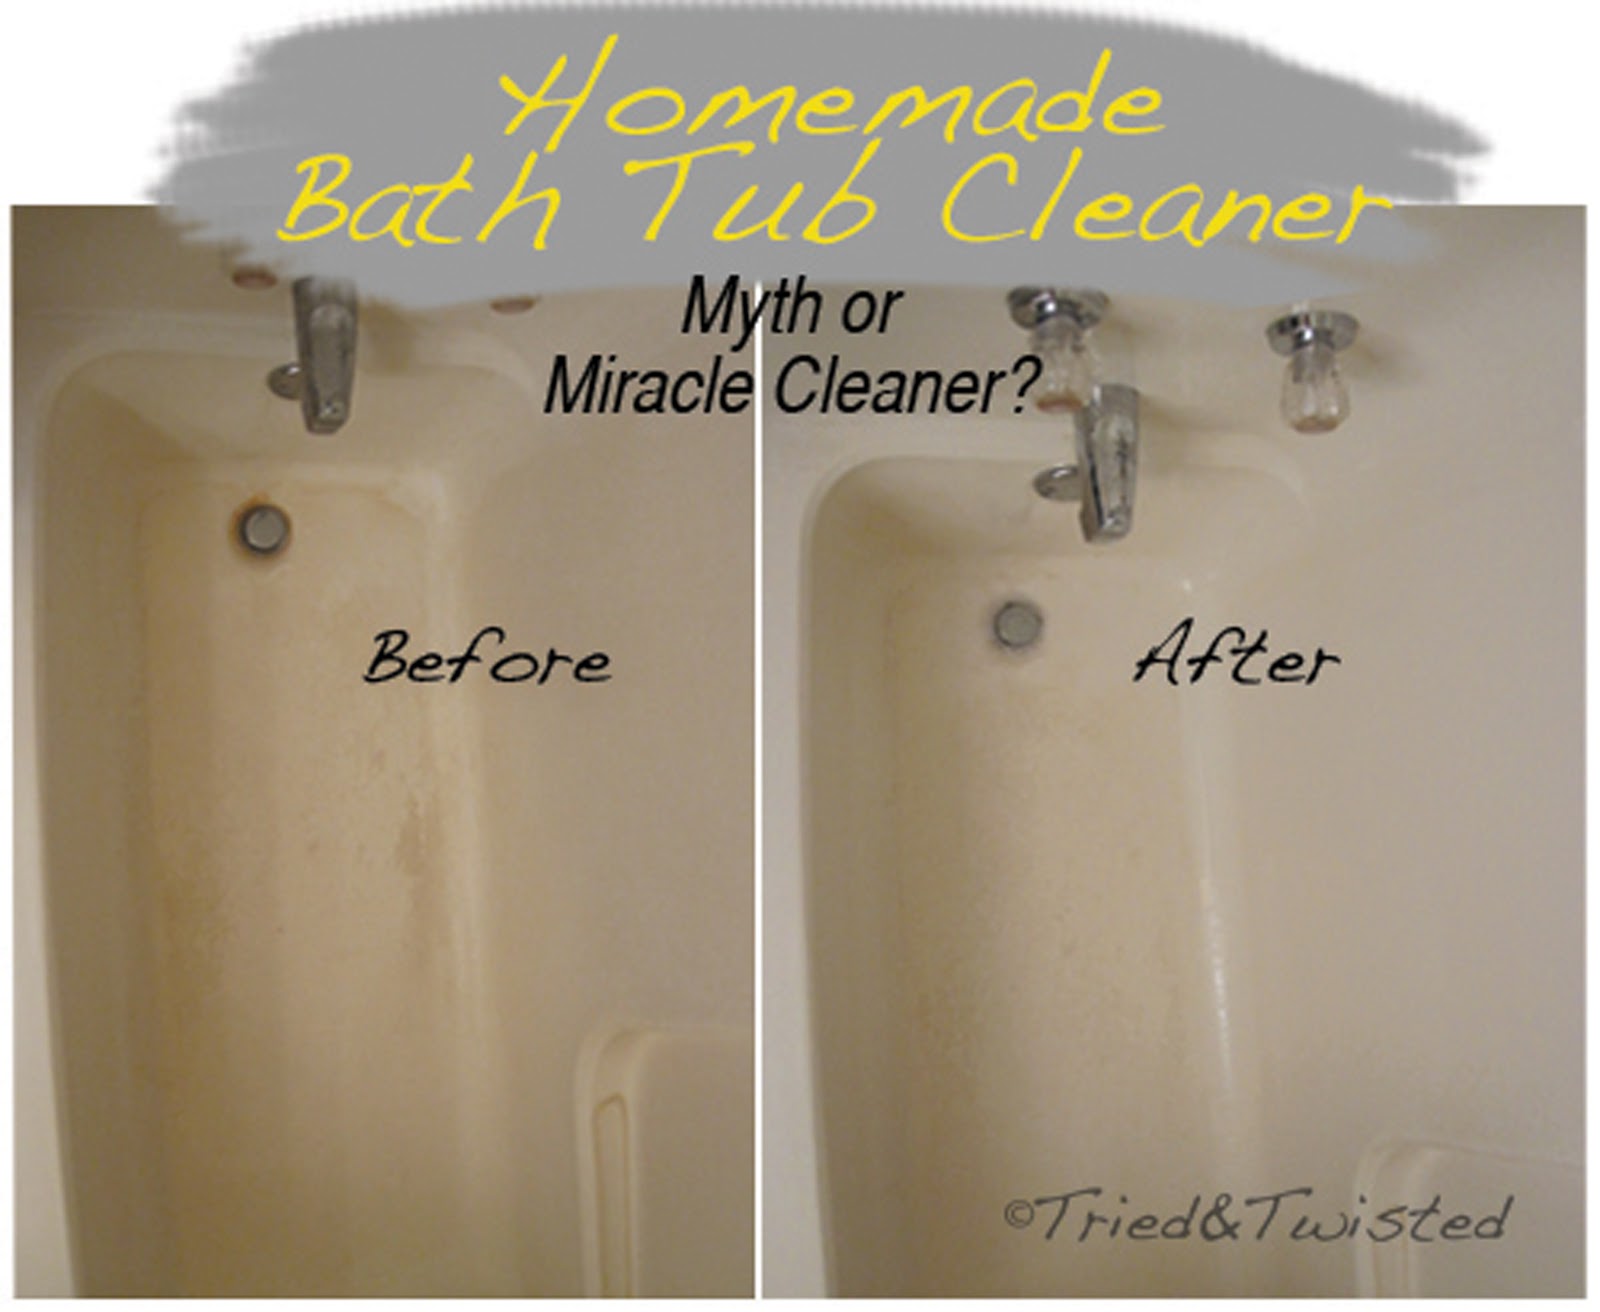 Tried and Twisted: Myth or Miracle Cleaner Series: Clean Your Bath 